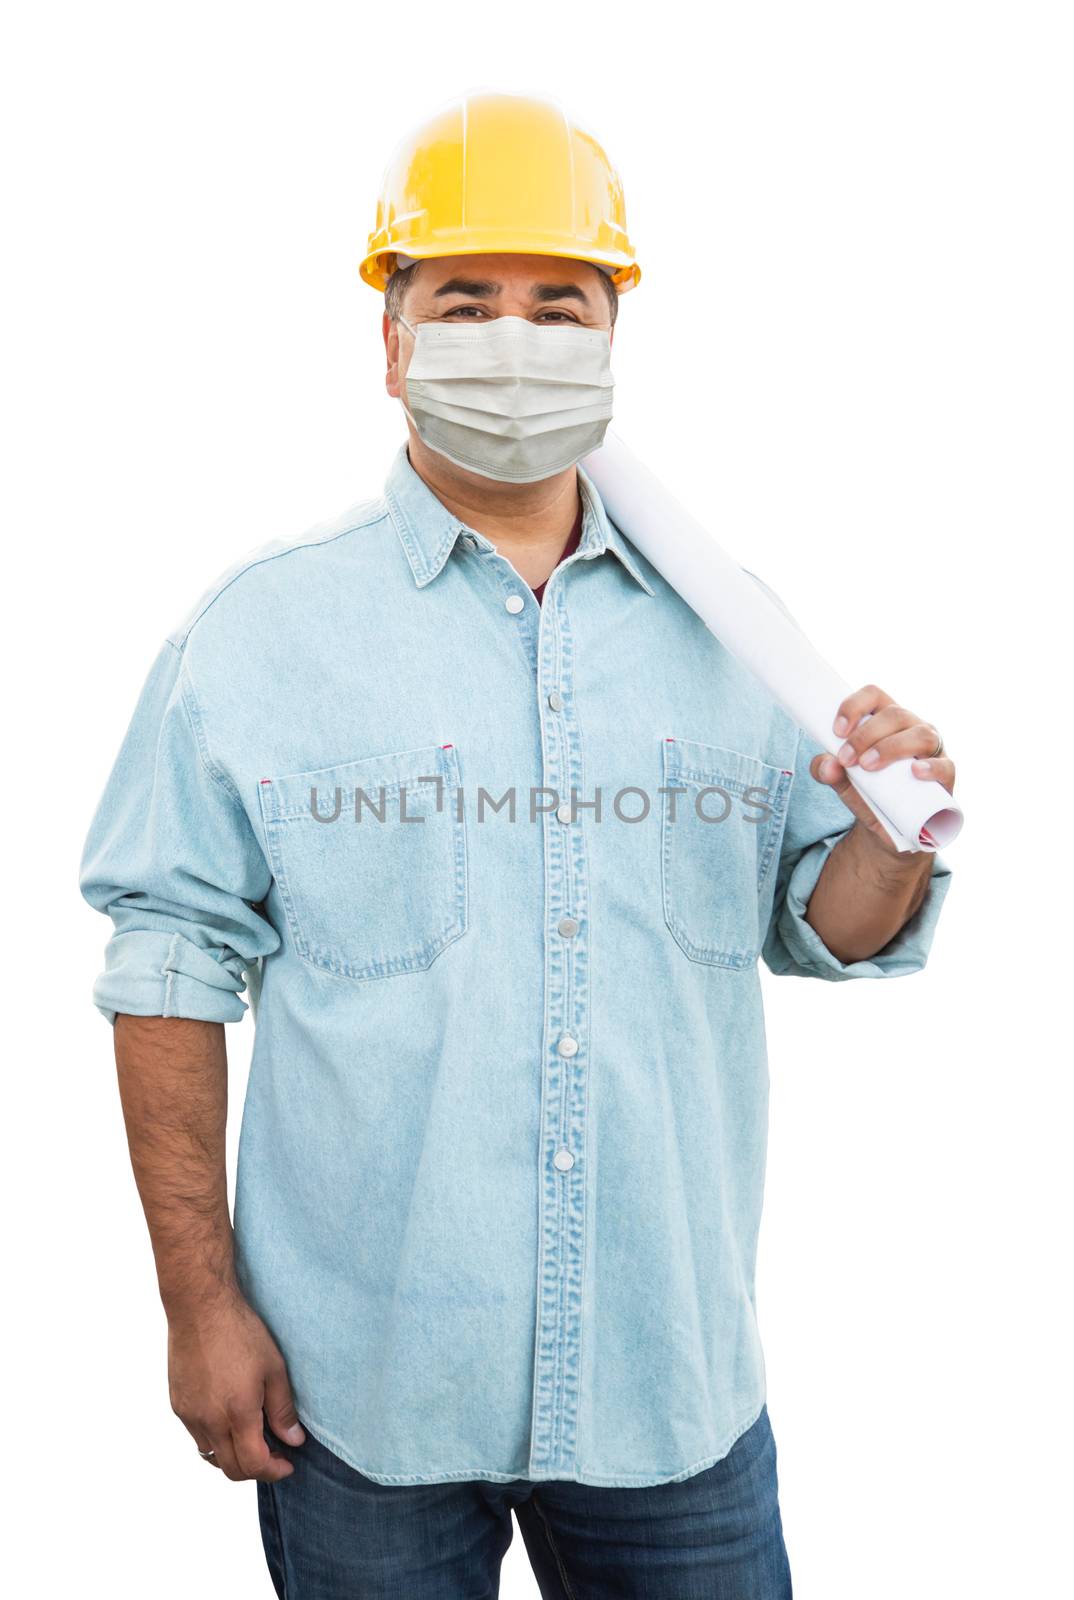 Male Contractor In Hard Hat Wearing Medical Face Mask During Coronavirus Pandemic Isolated on White.